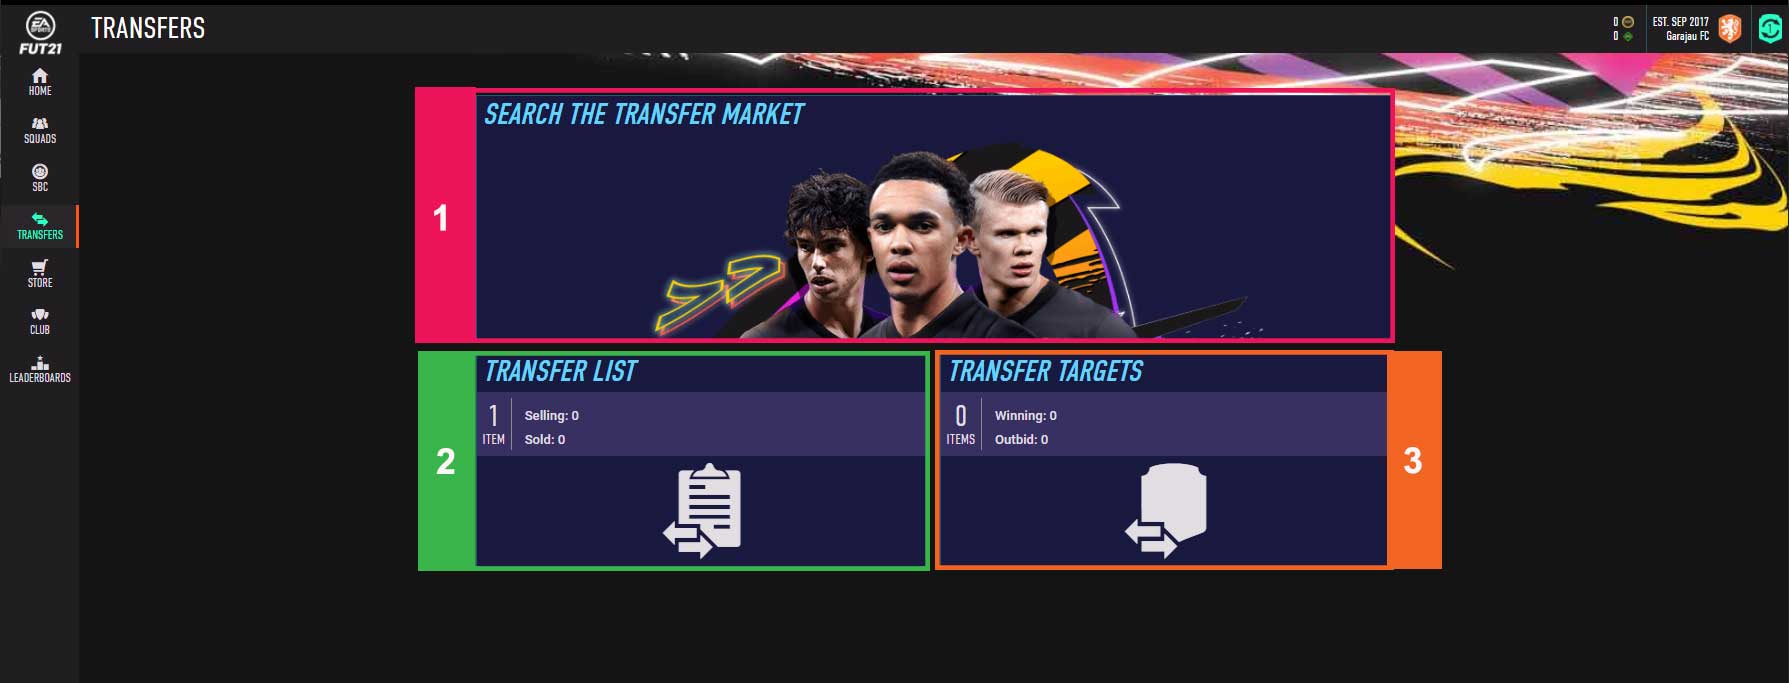 FIFA 22 Web App: Release Date, Details and Tutorial